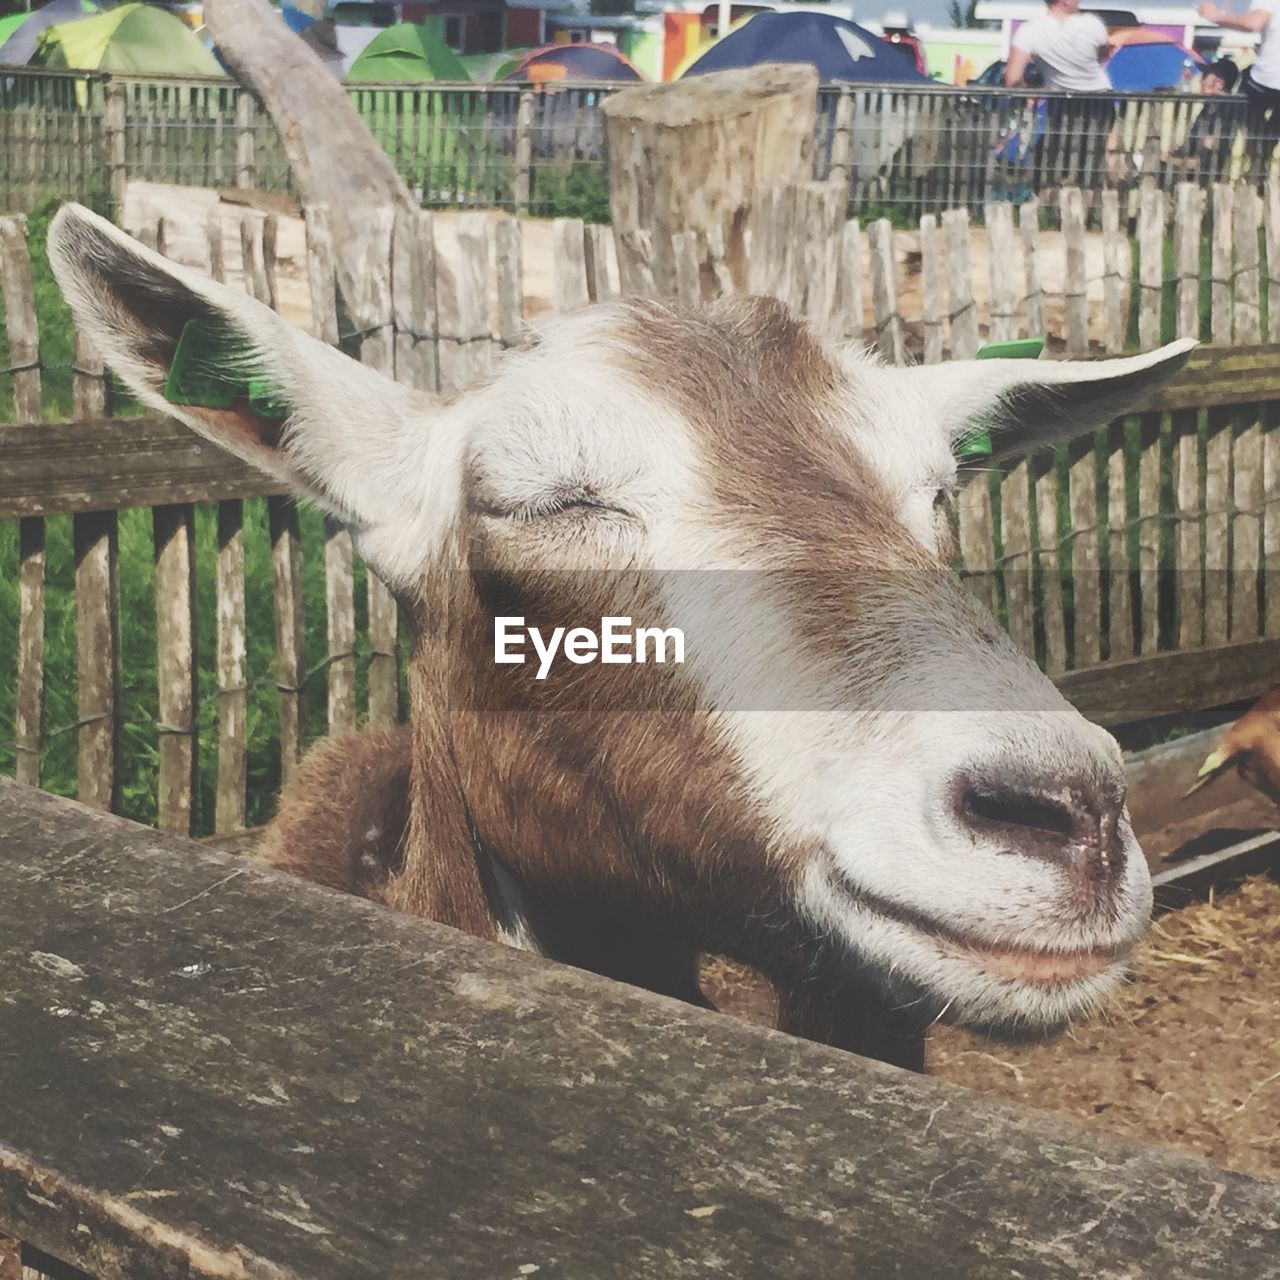 Goat with eyes closed in animal pen